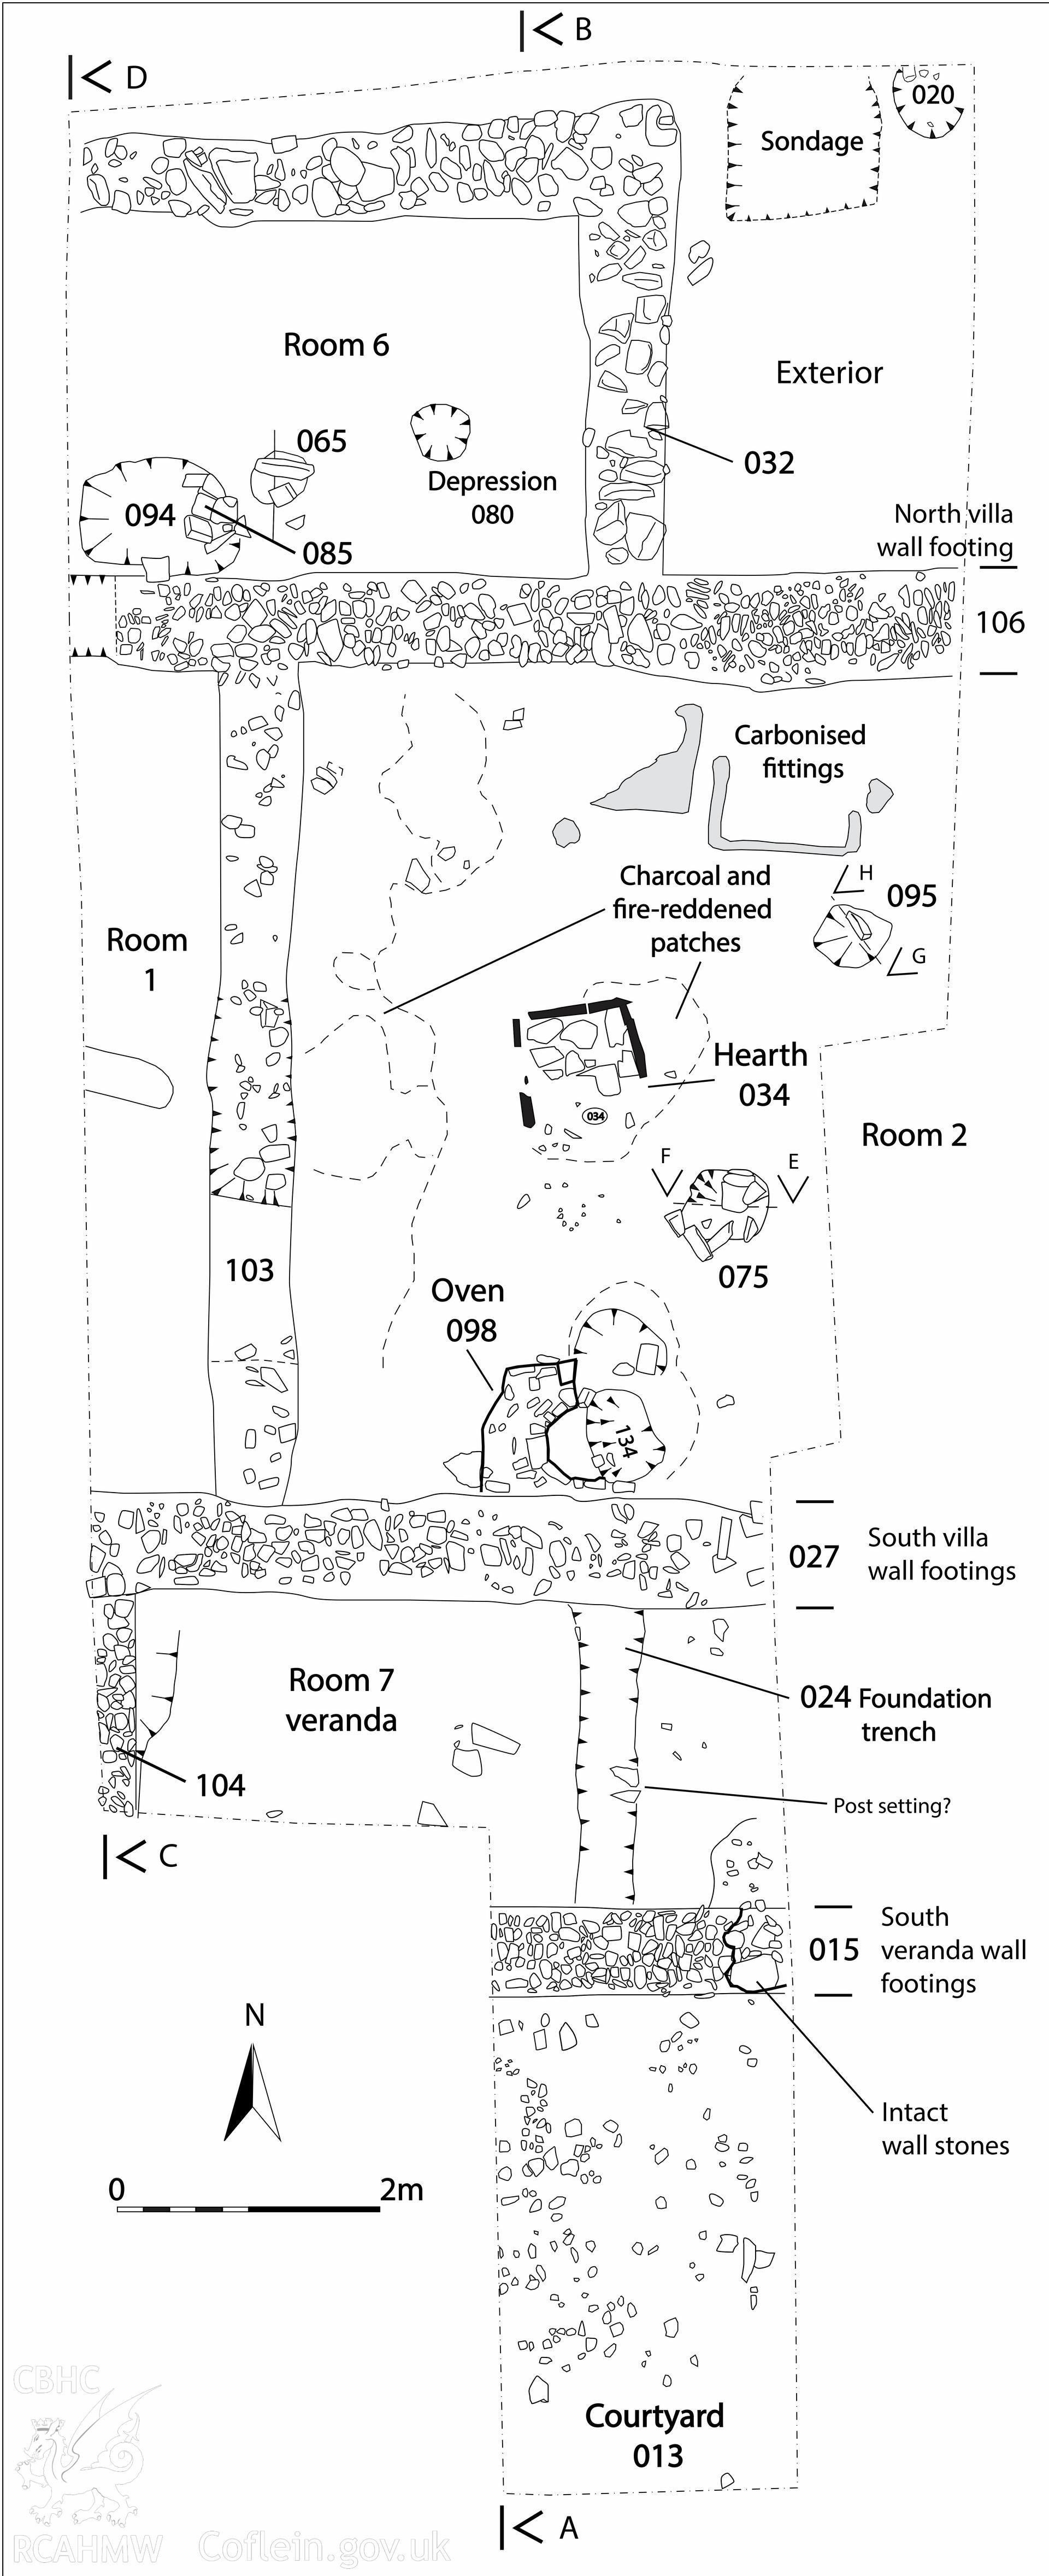 Arch Camb 167 (2018) 143-219. "The Romano-British villa at Abermagwr, Ceredigion: excavations 2010-2015" by Davies and Driver. Web-friendly .tif version of Fig 7. Plan of Trenches A and C.